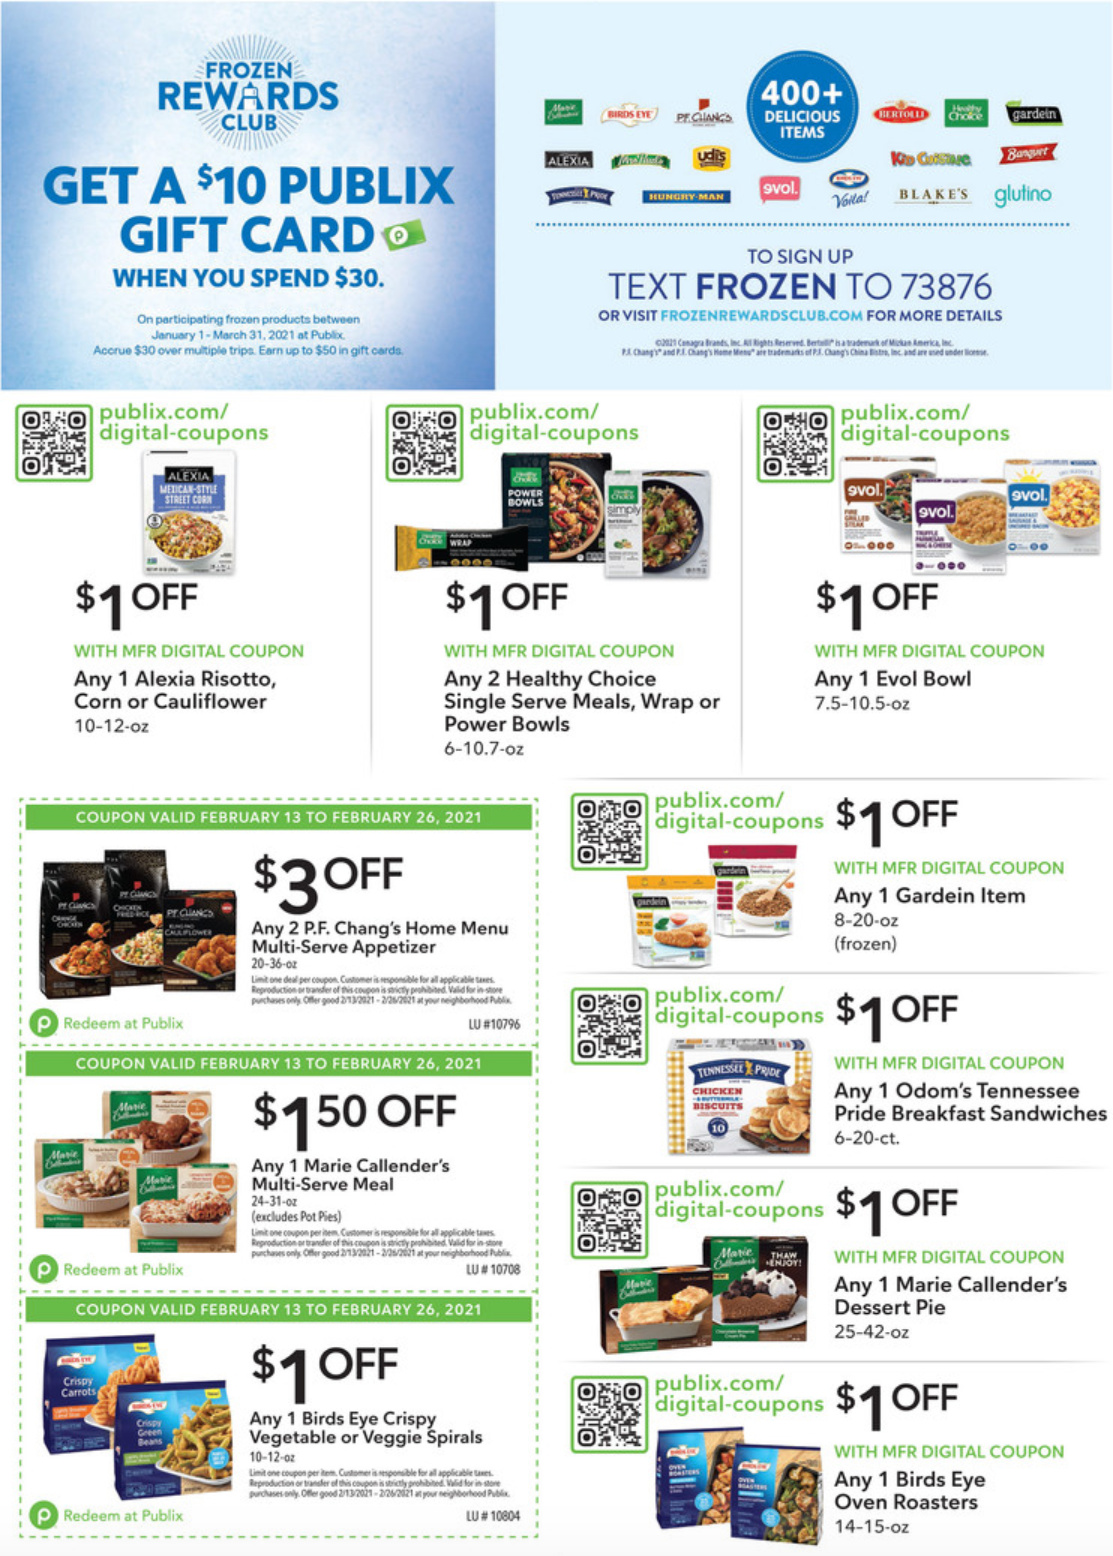 Frozen Rewards Club Savings Are Back - Save Up To $13 AND Earn Gift Cards! on I Heart Publix